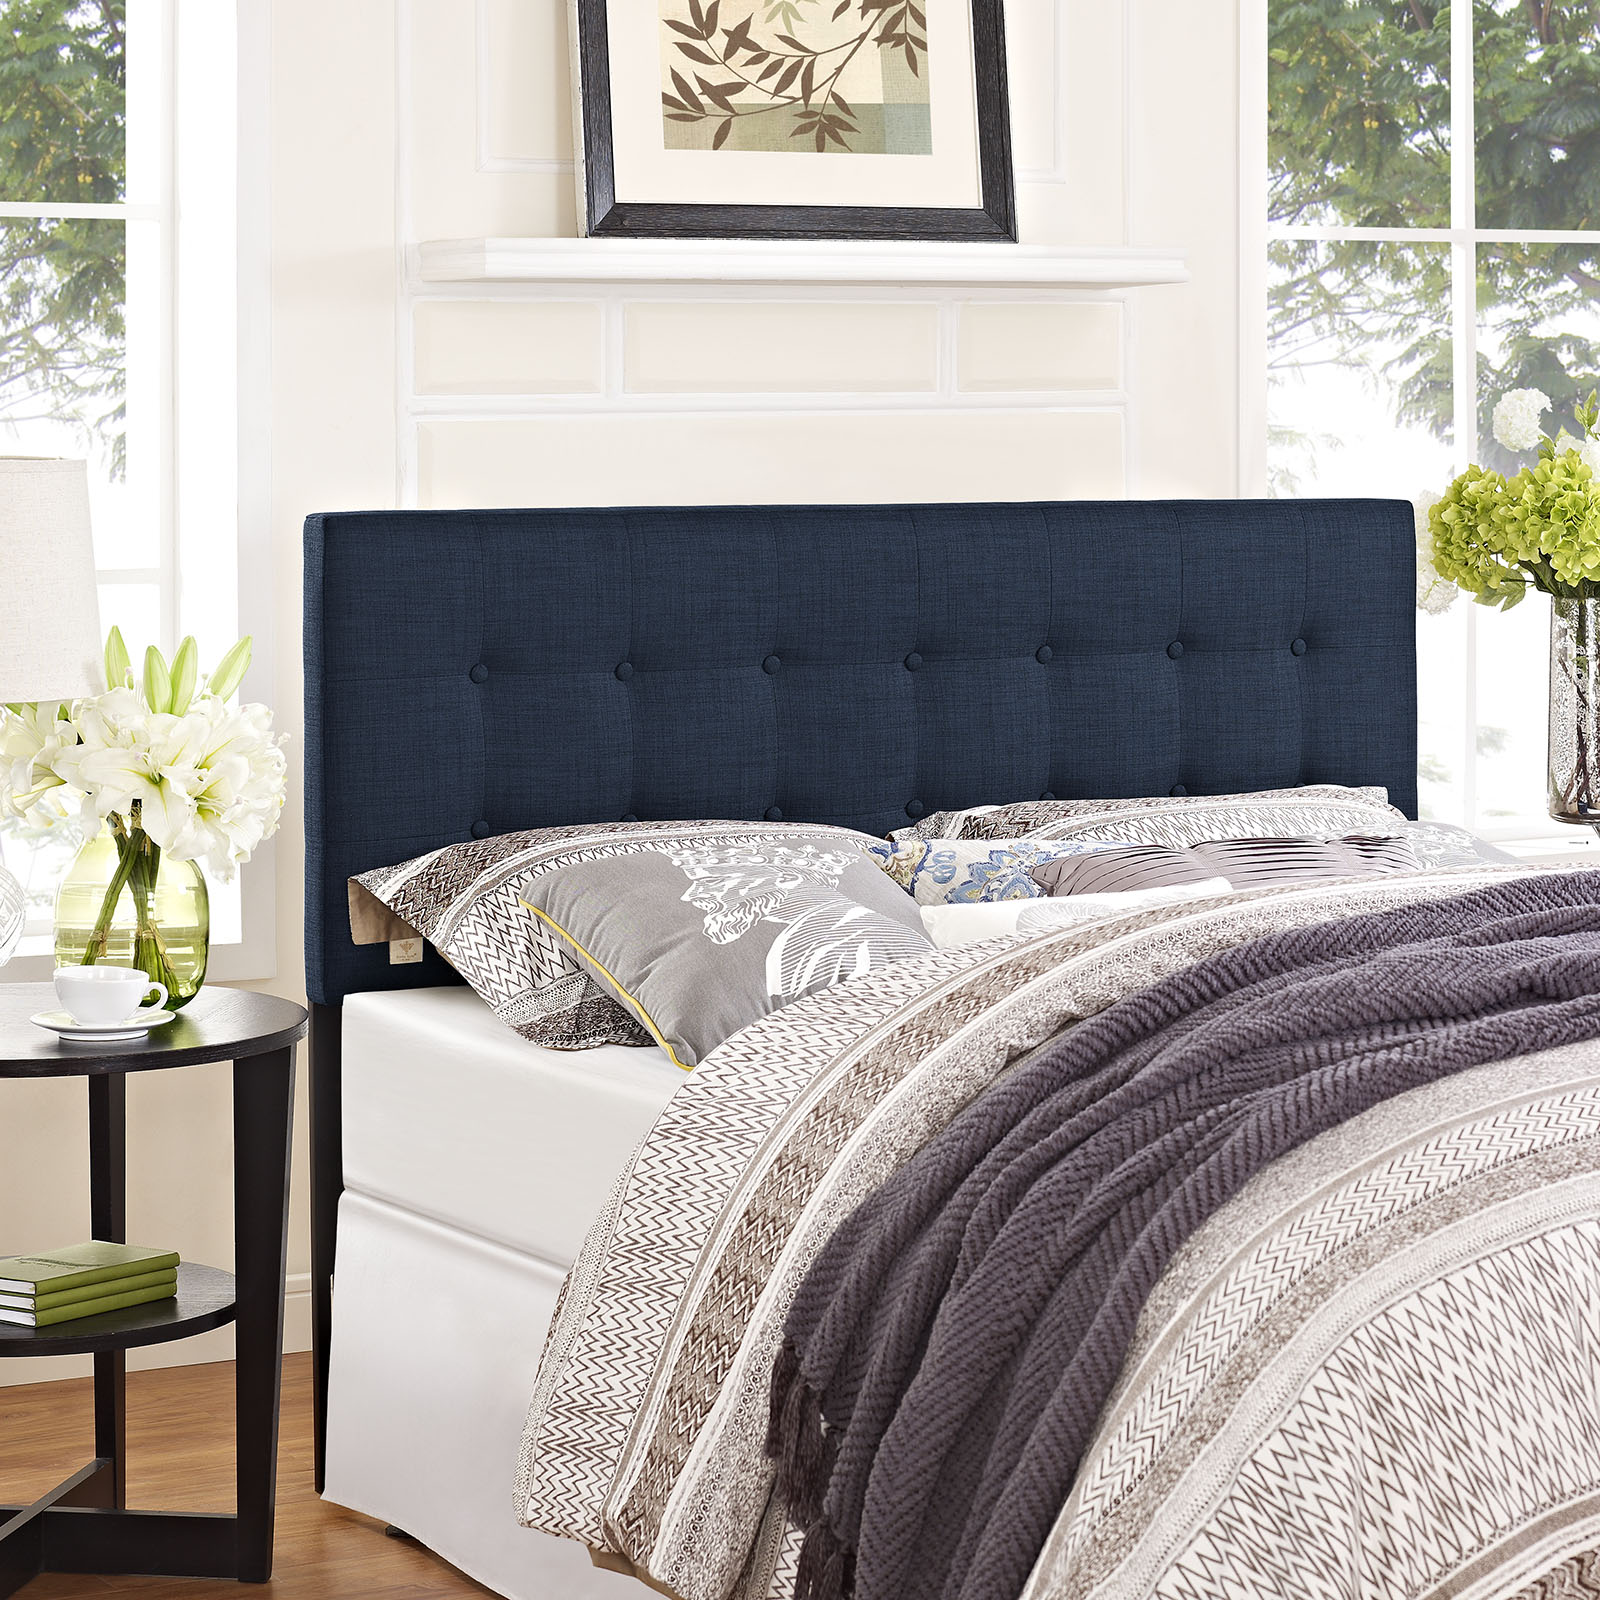 LexMod Emily Queen Upholstered Fabric Headboard in Navy